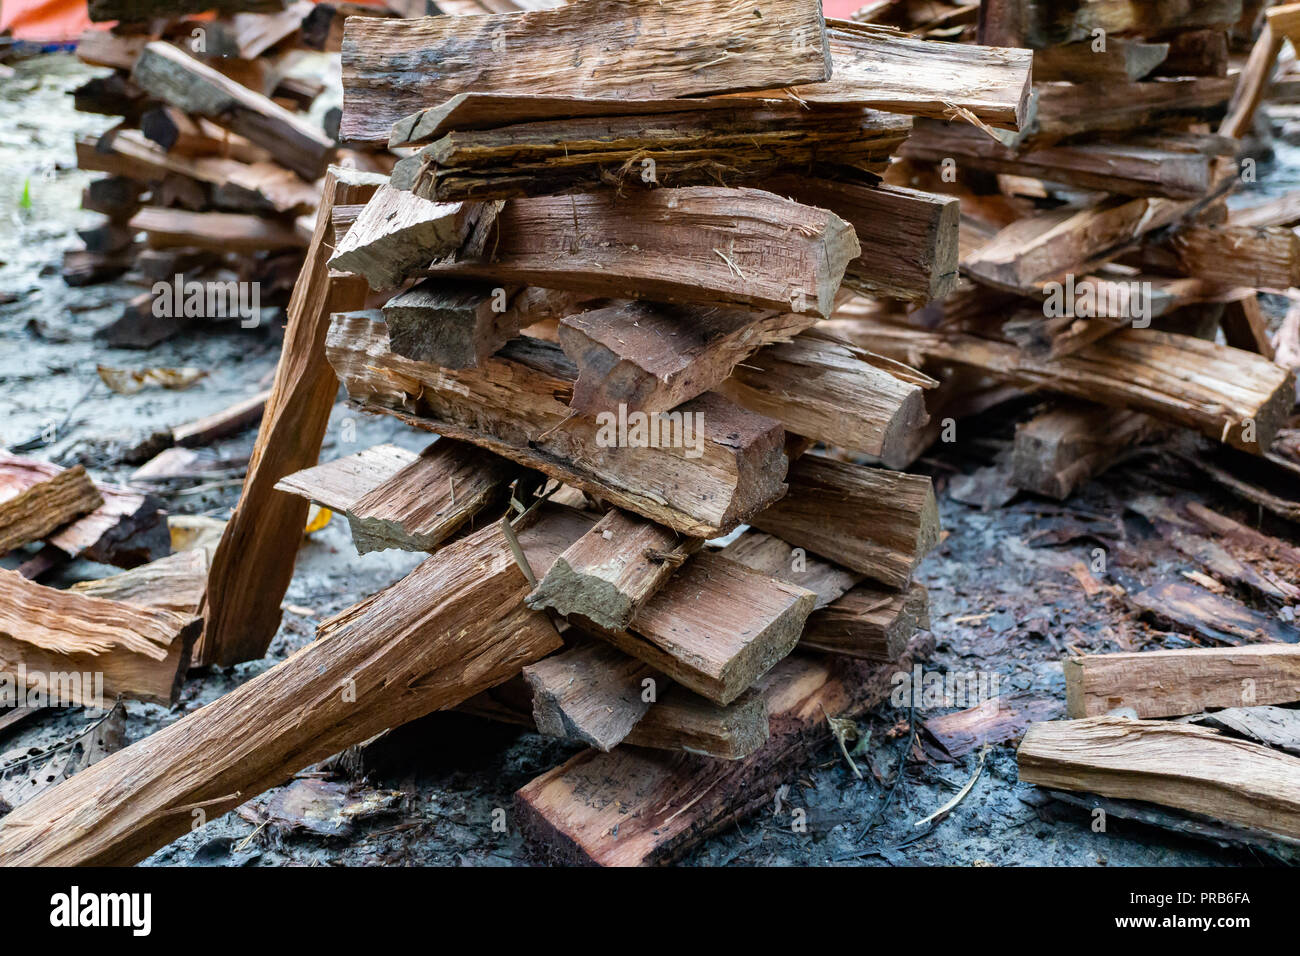 A pile of firewood on the ground. Freshly chopped wooden logs. Stock Photo